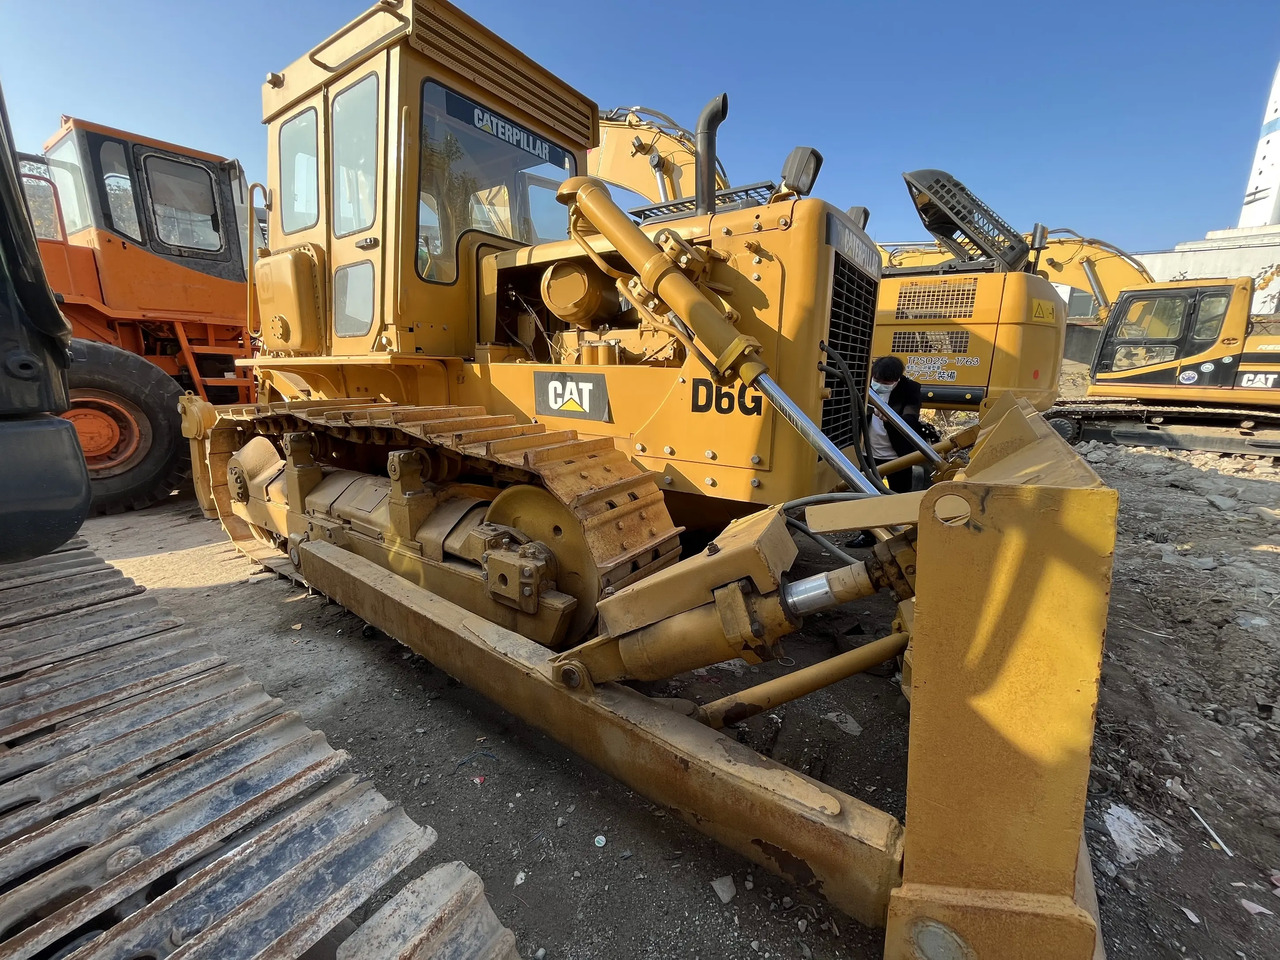 Caterpillar used bulldozer D6G D6R D7G D7R CAT bulldozer secondhand machine cheap price for sale - Bulldozer: picture 2